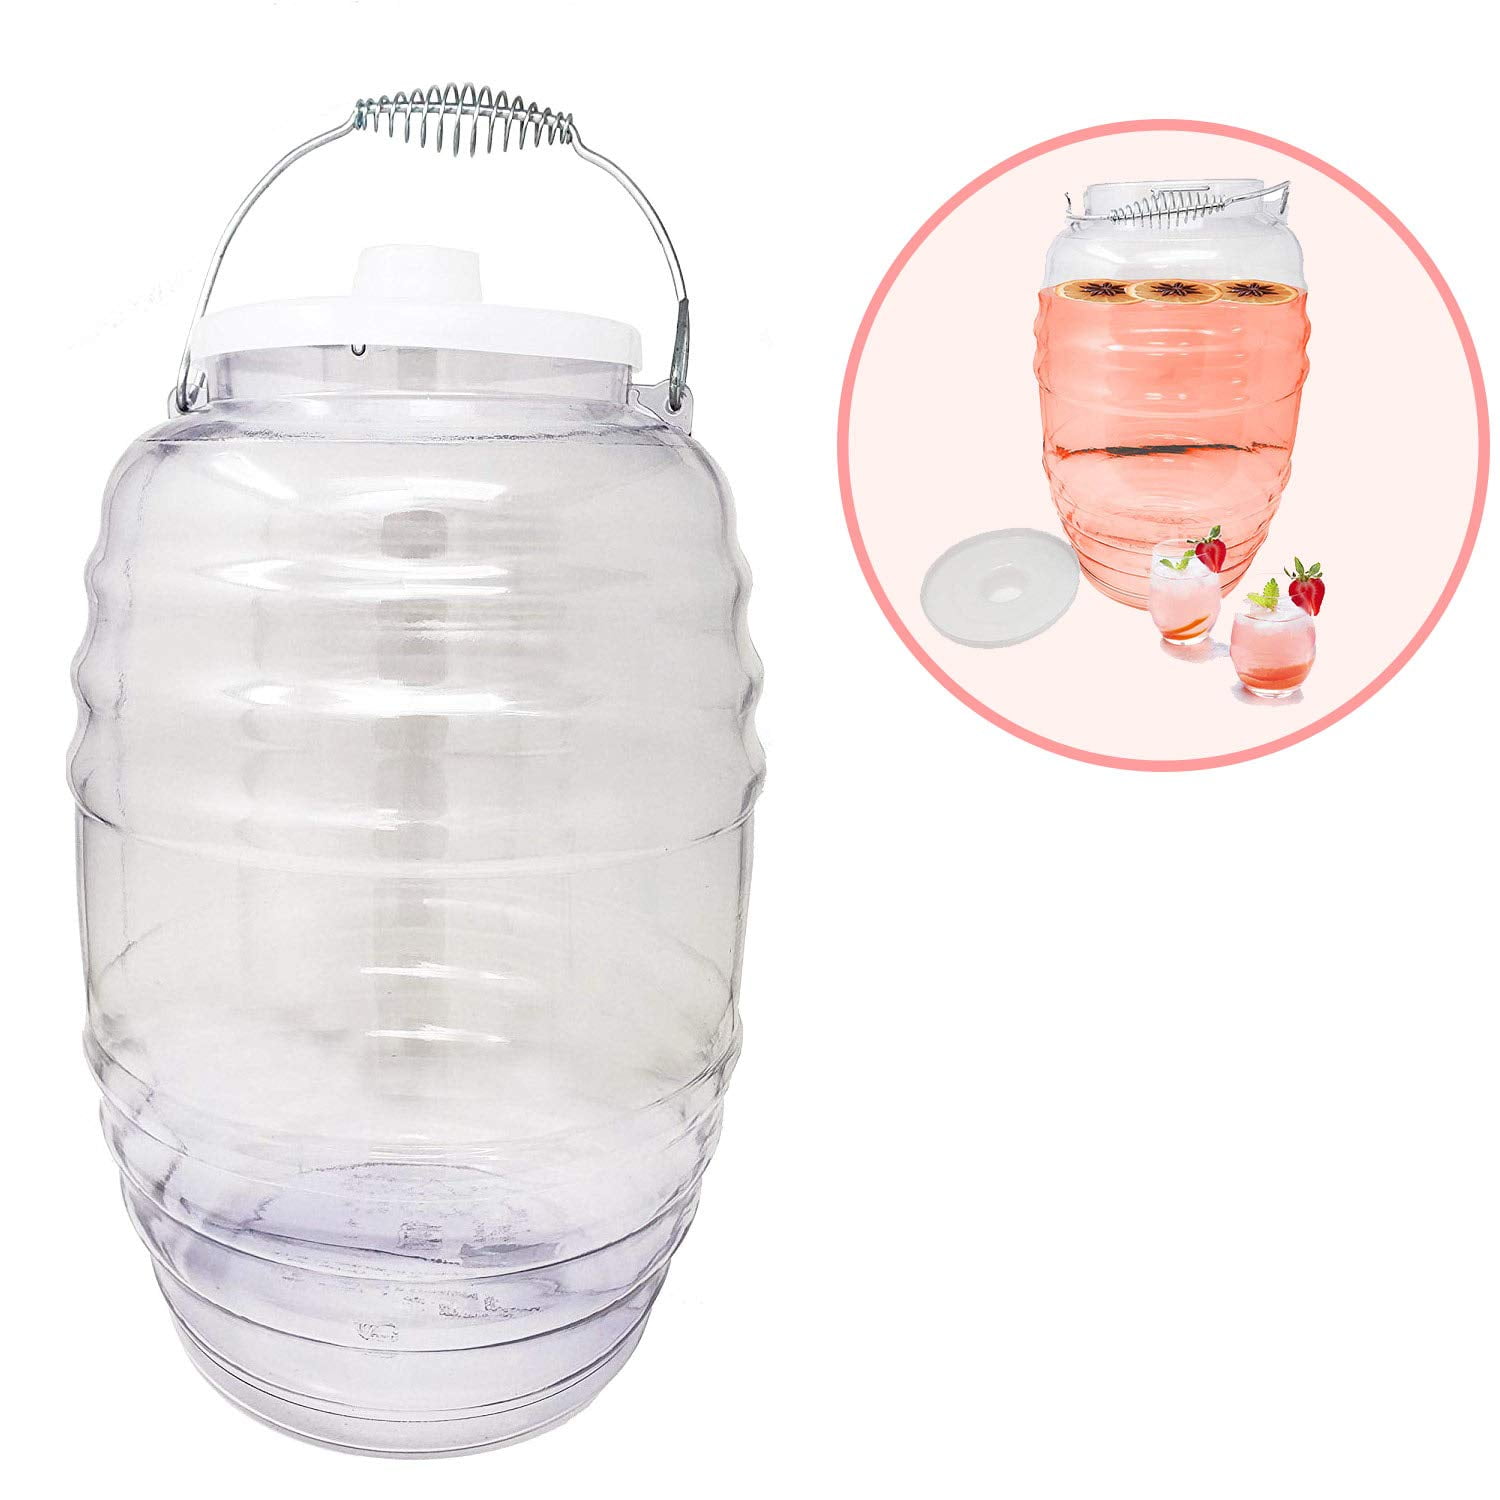 Mexican Clear Vitrolero with Lid, 5 Gallon Jug for Aguas  Frescas, Juice, Sun Tea, or other Beverages with Lid, 20 L Clear, BPA-Free  Food-Grade Plastic Container for Parties, Reusable Set